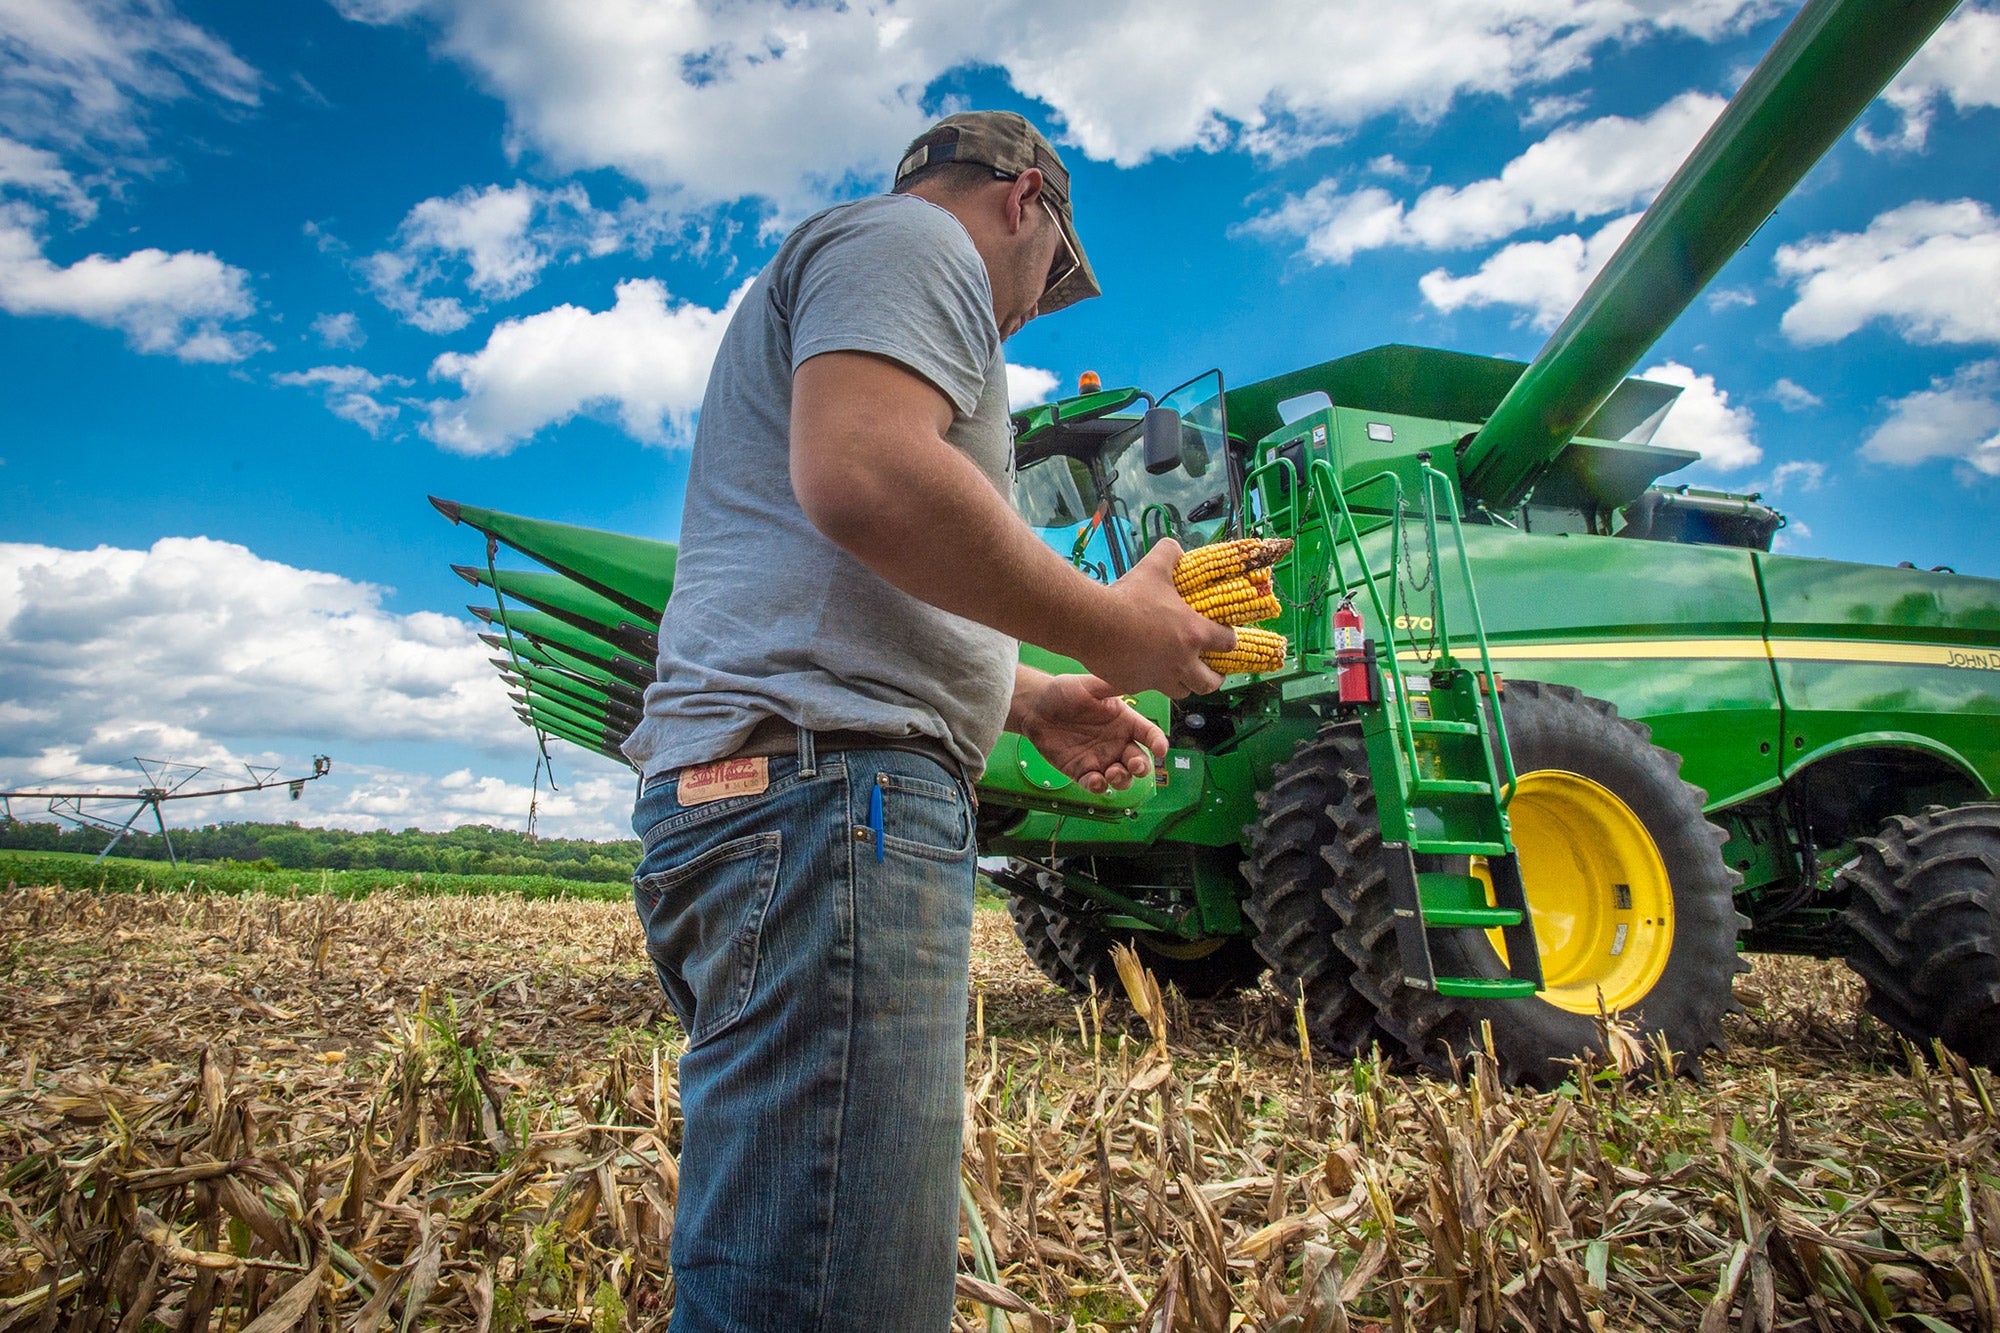 Tractor Supply awards 50 grants to veterans for farm projects AGDAILY